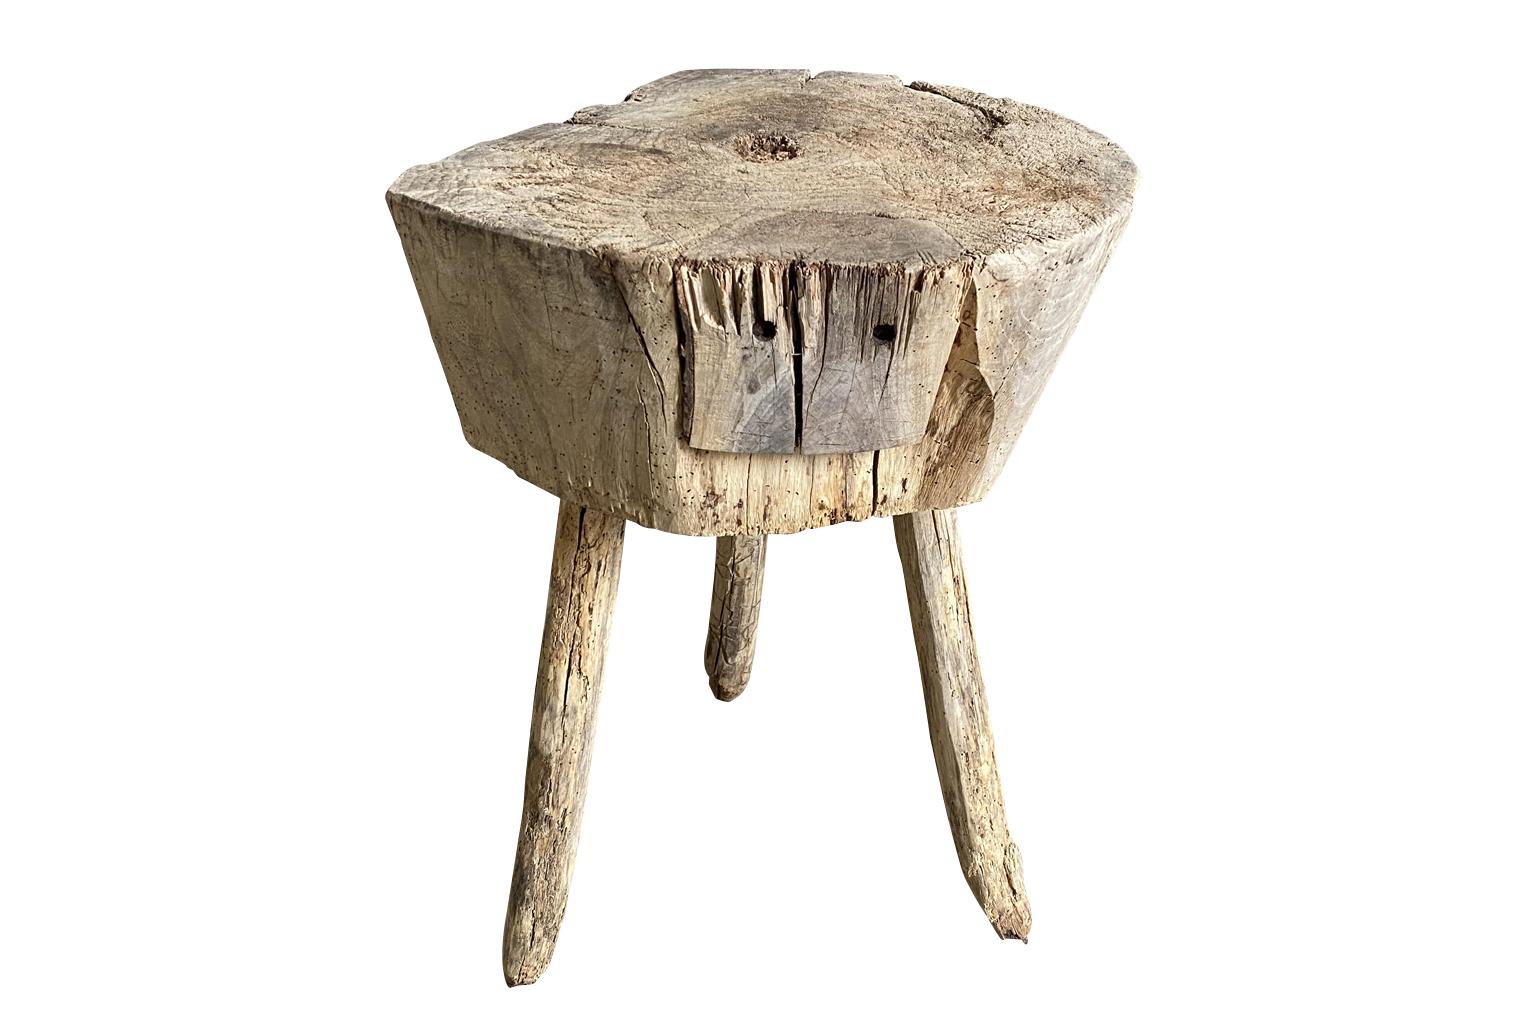 A 19th century Billot - or chopping block from the South of France. Perfect as an end table or side table in a rustic or modern environment. Terrific patina.